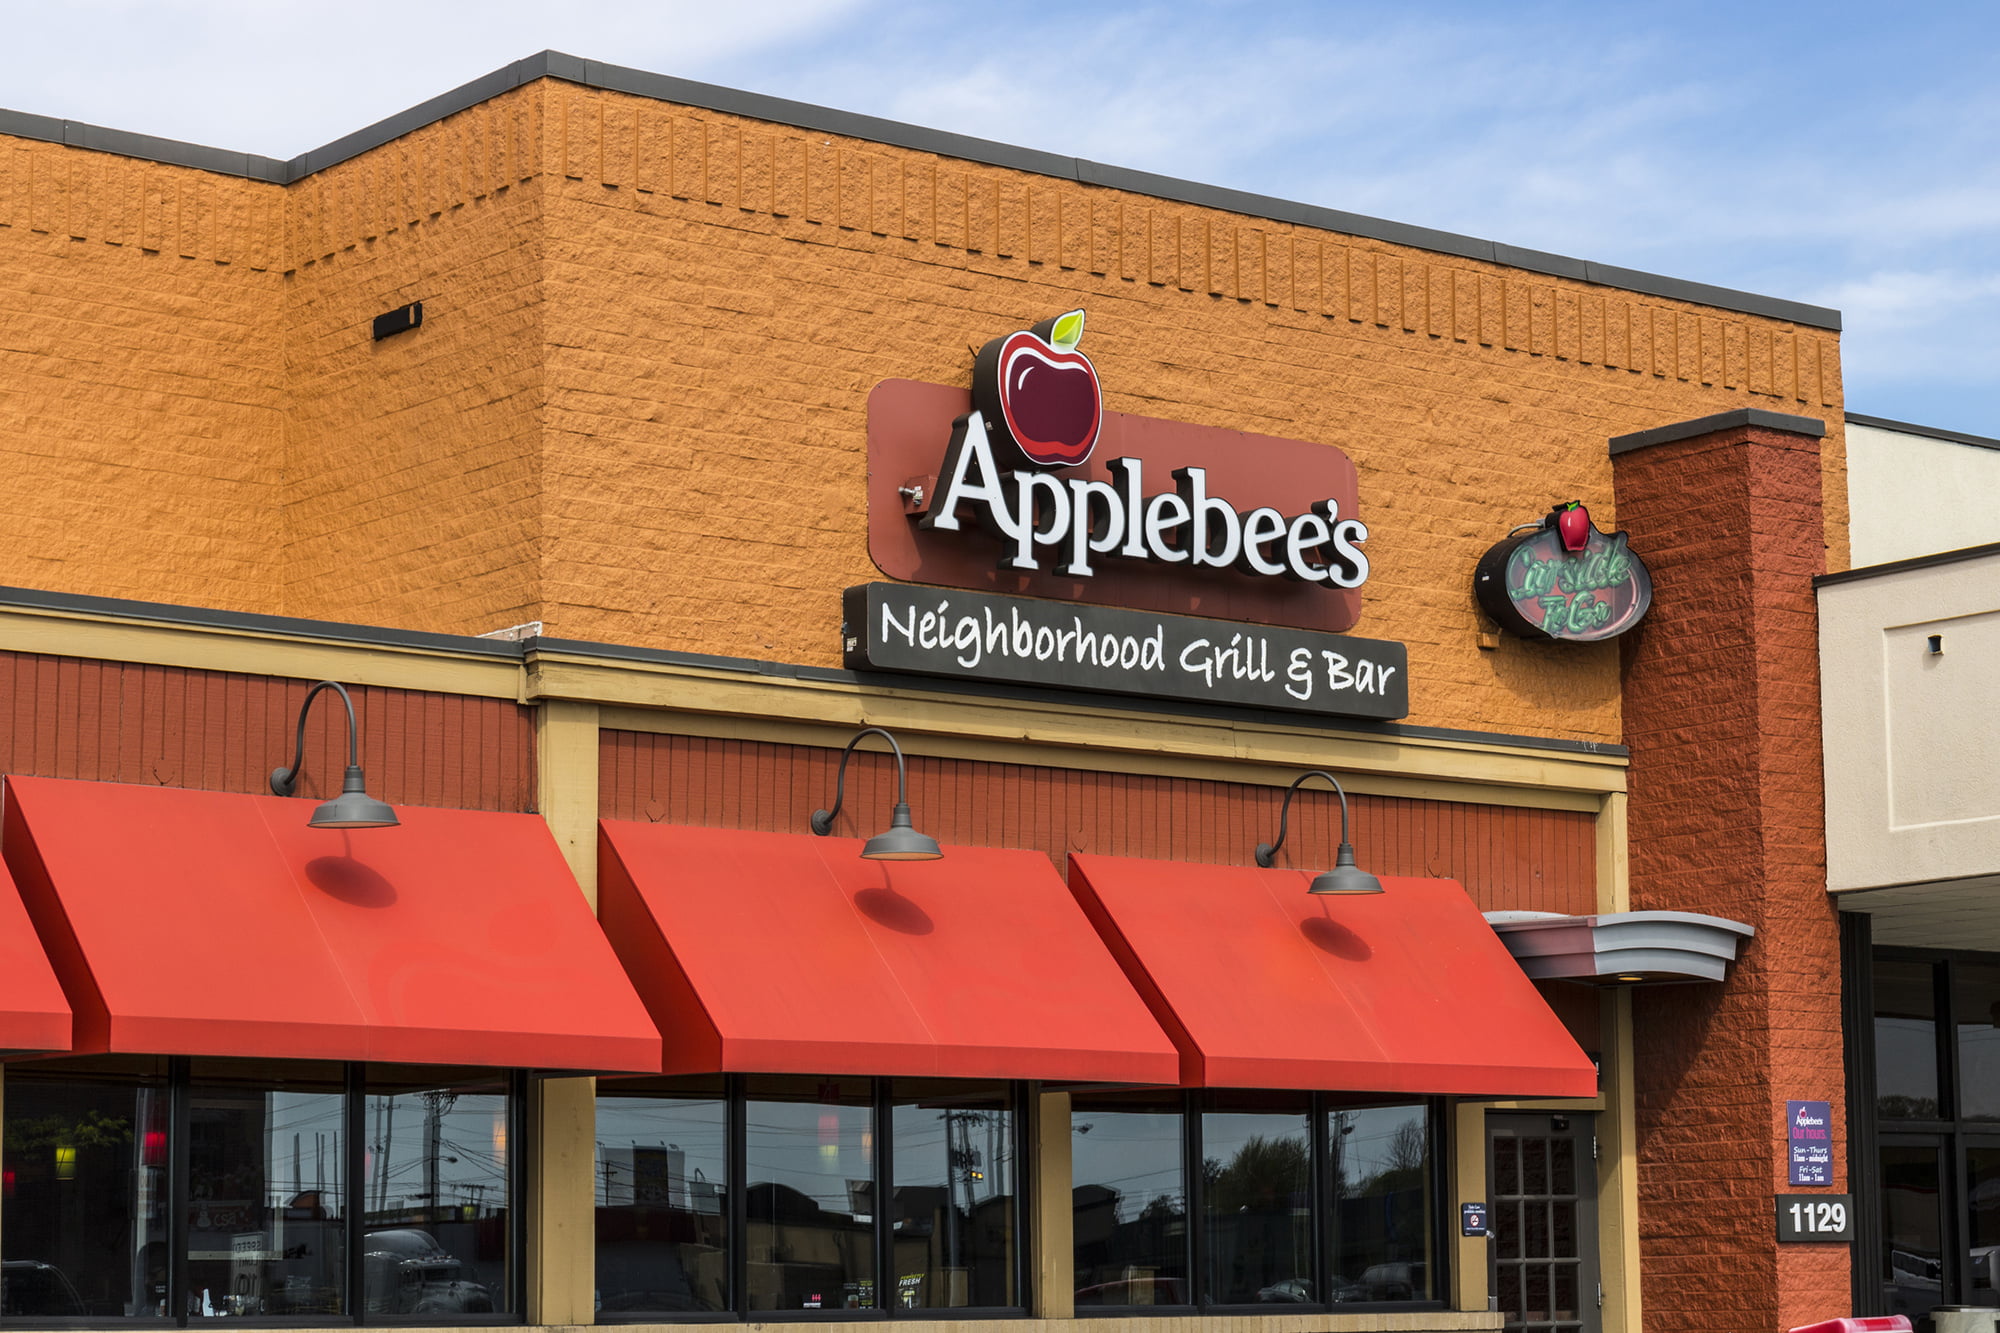 The incident occurred at an Applebee's in New York.